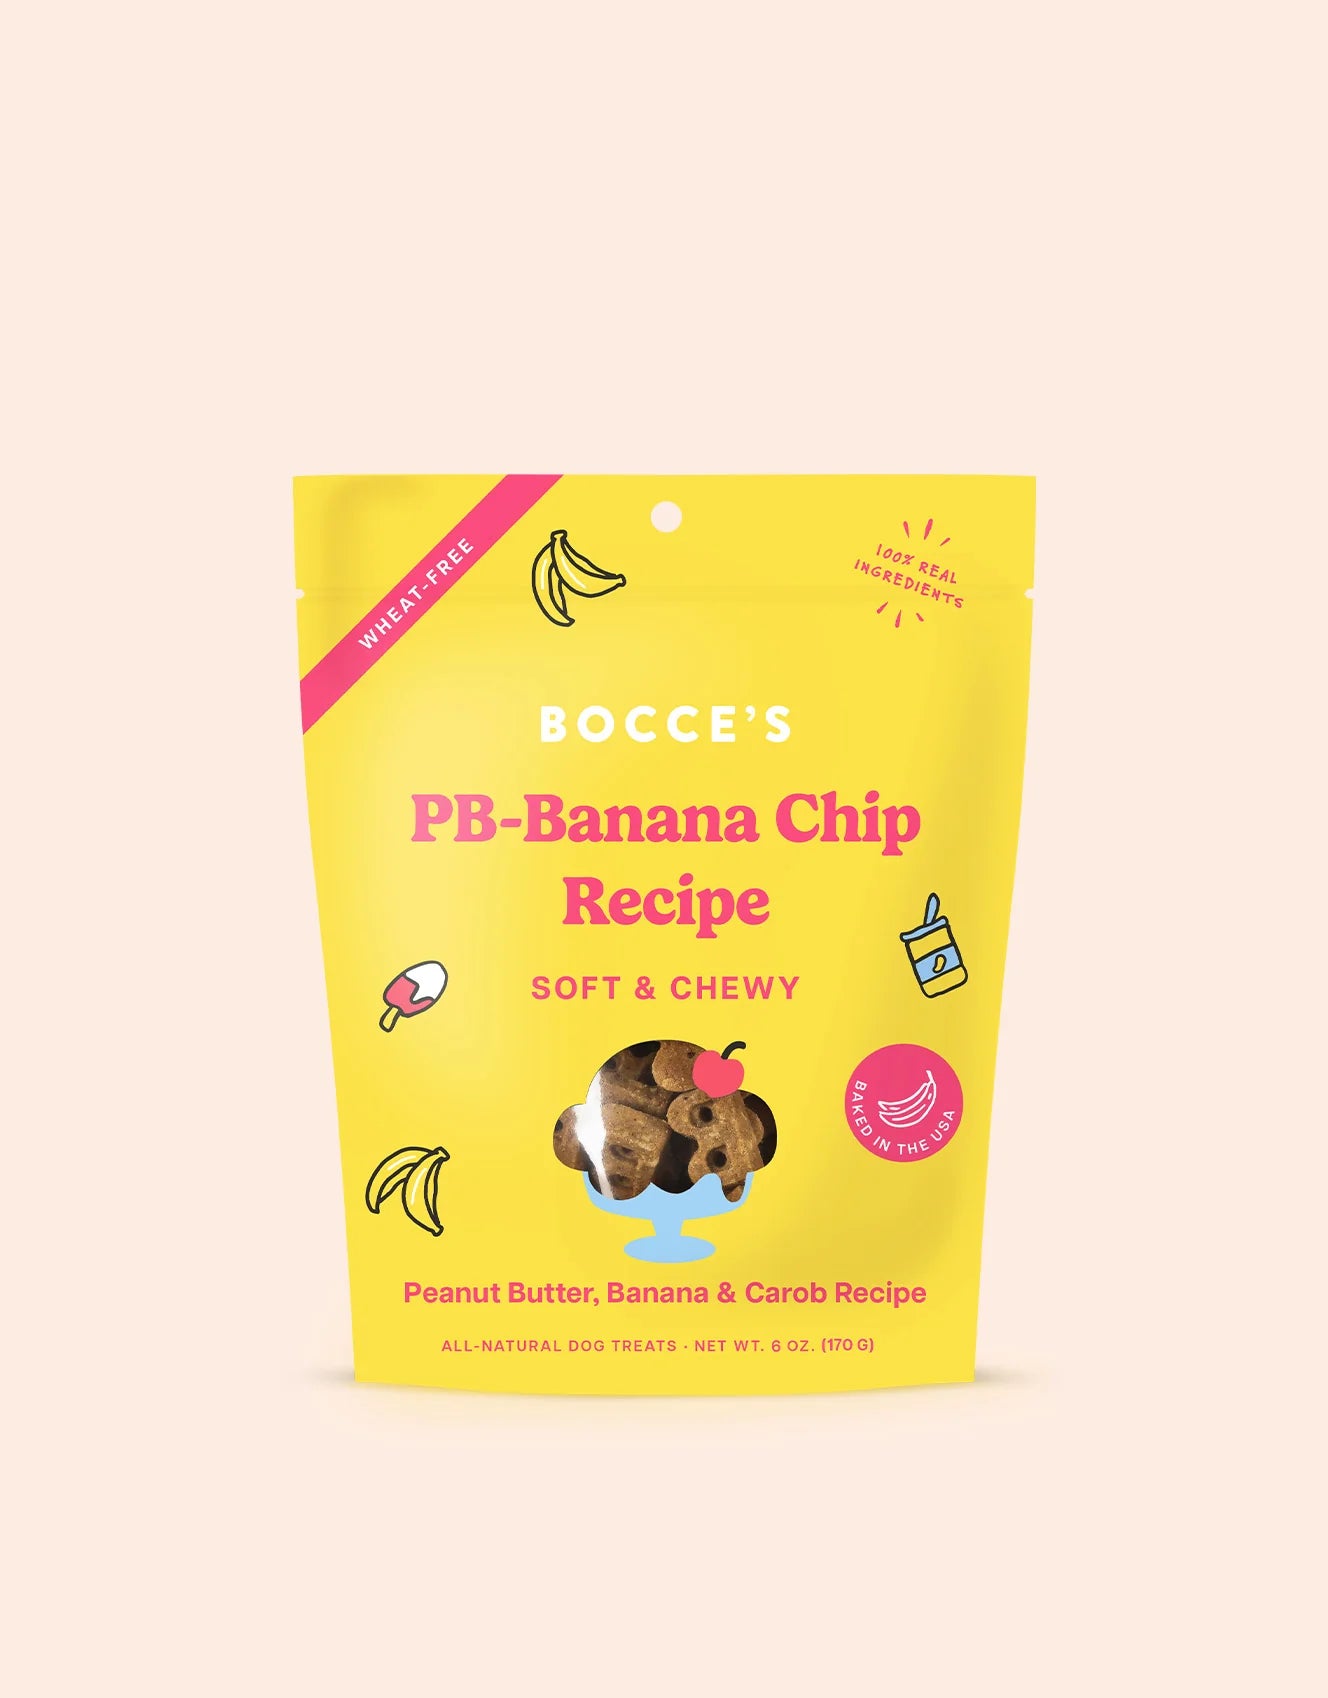 Bocce's PB-Banana Chip Recipe - Soft & Chewy